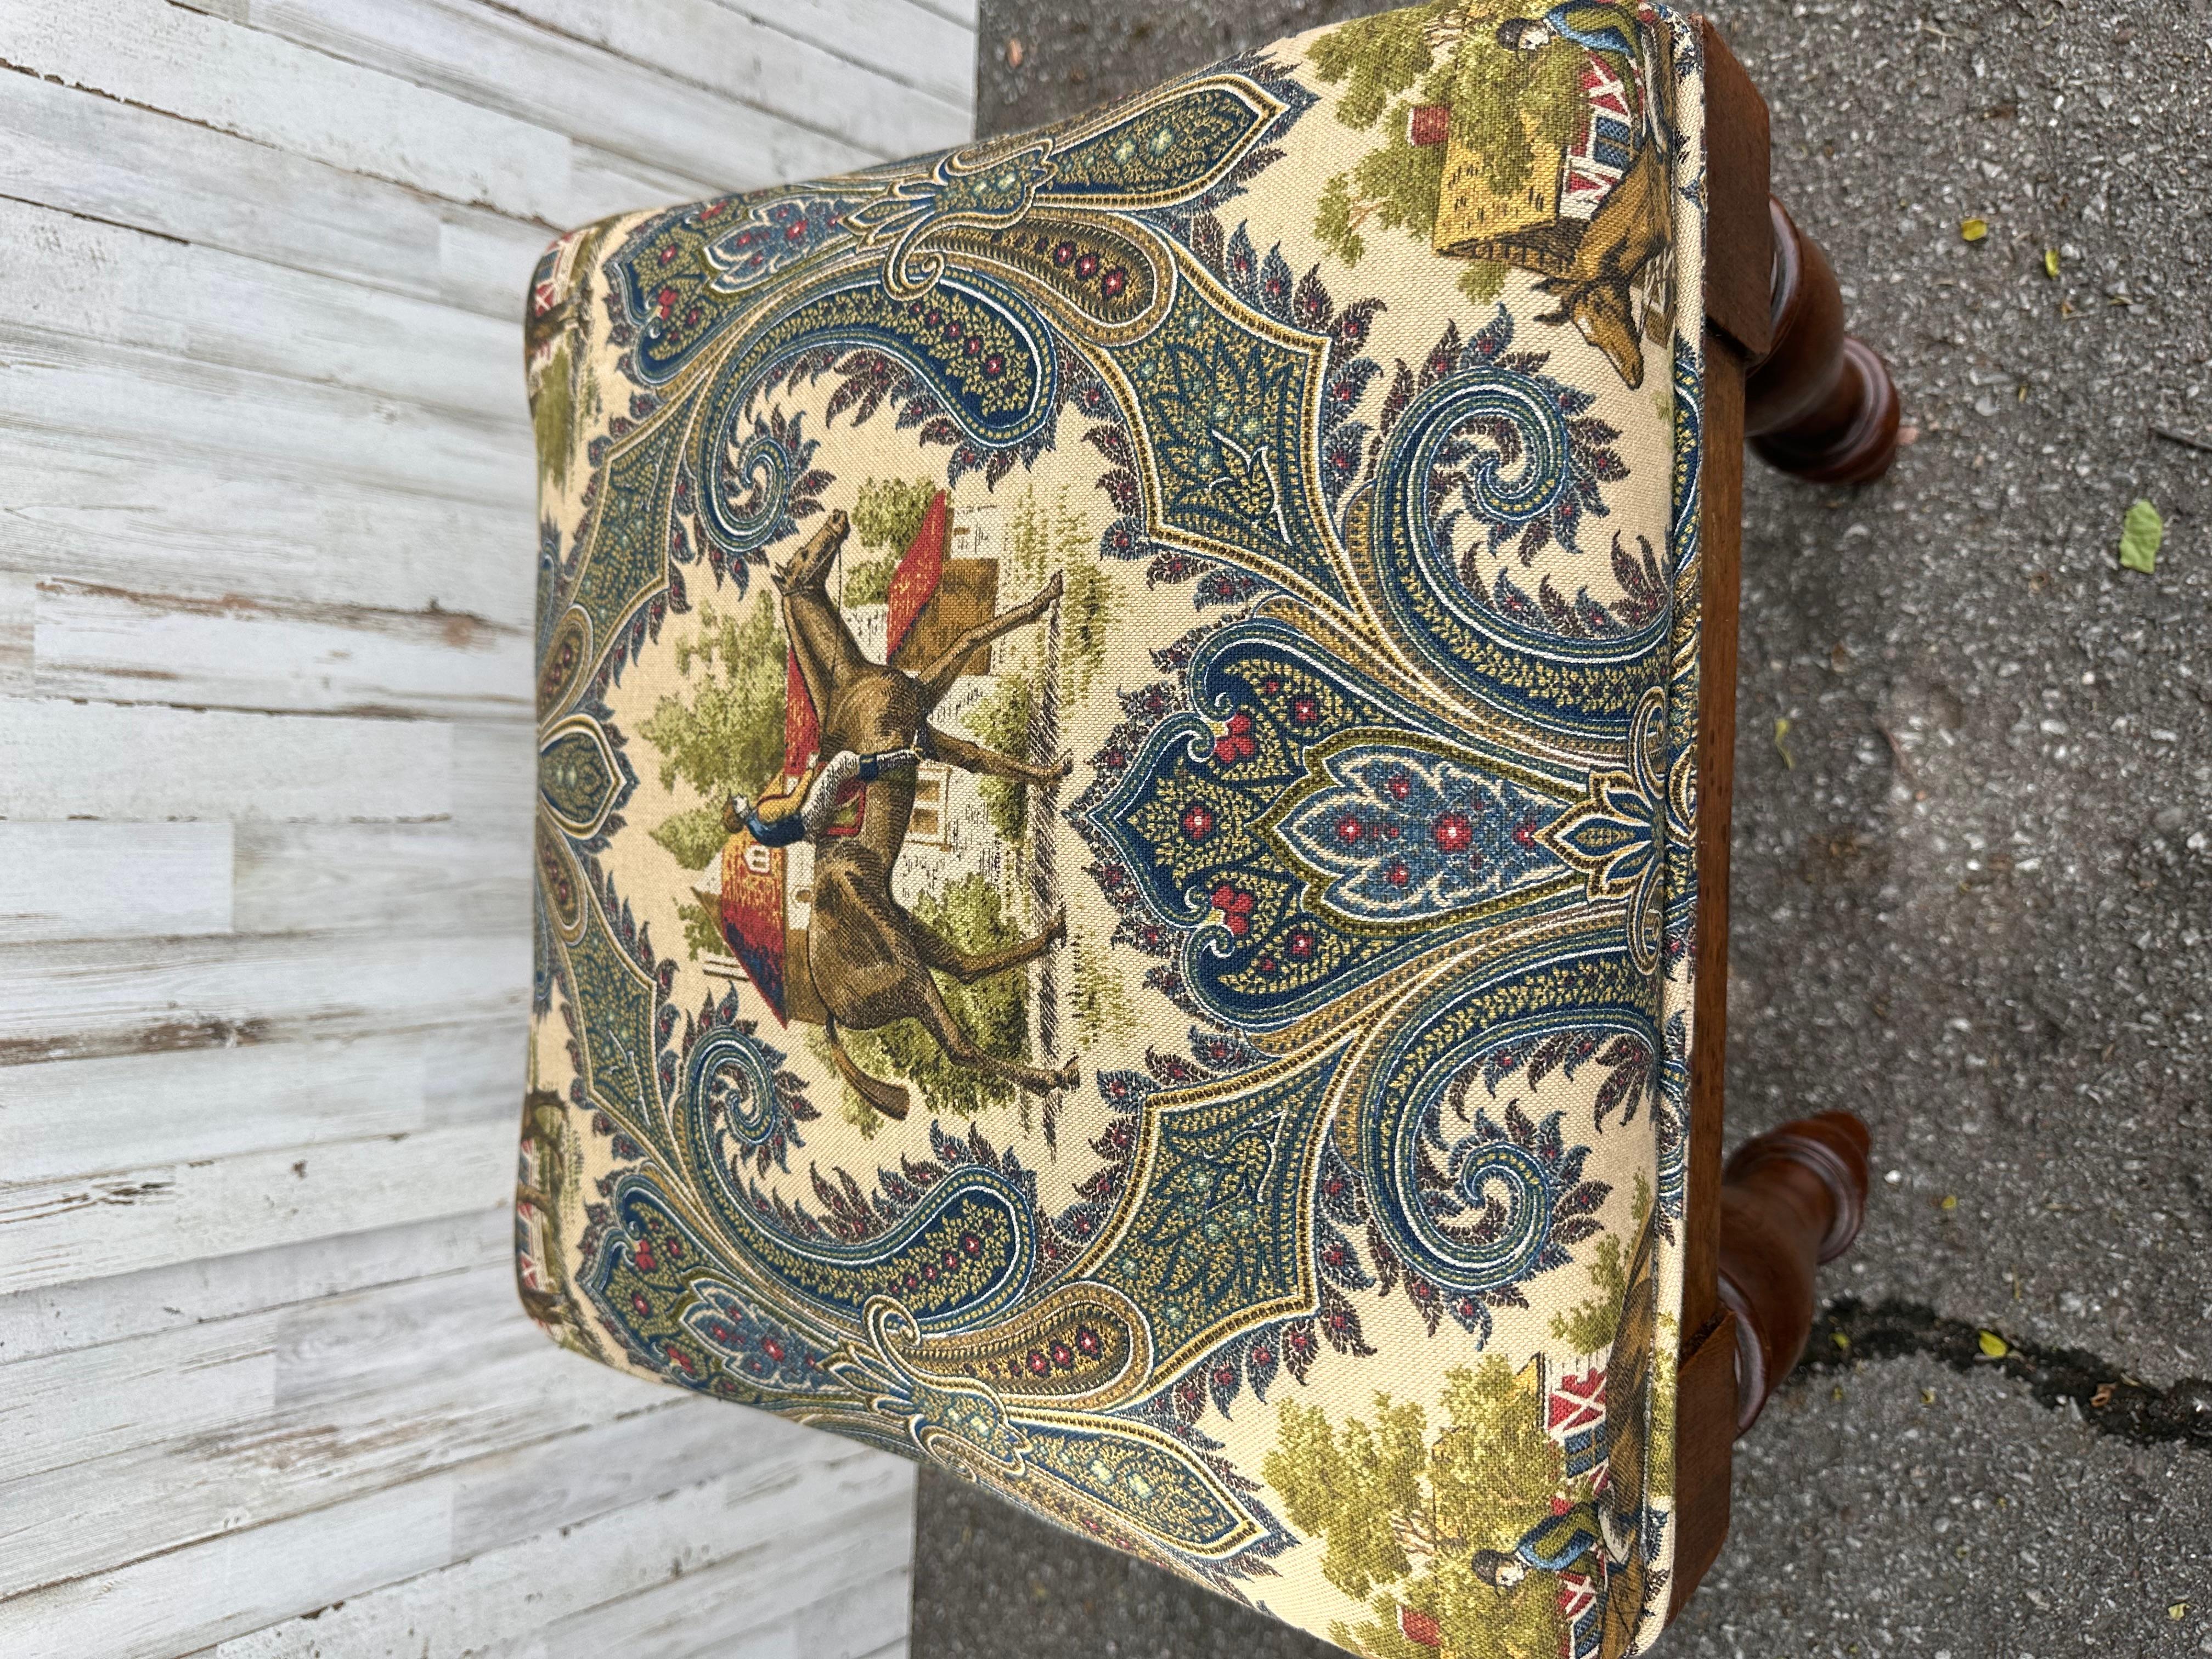 There is a 19th century French stool frame that we acquired and had recovered in a beautiful equestrian fabric. I really love the size of the legs for a small piece it gives it such a presence having the larger turned legs. The frame is an excellent